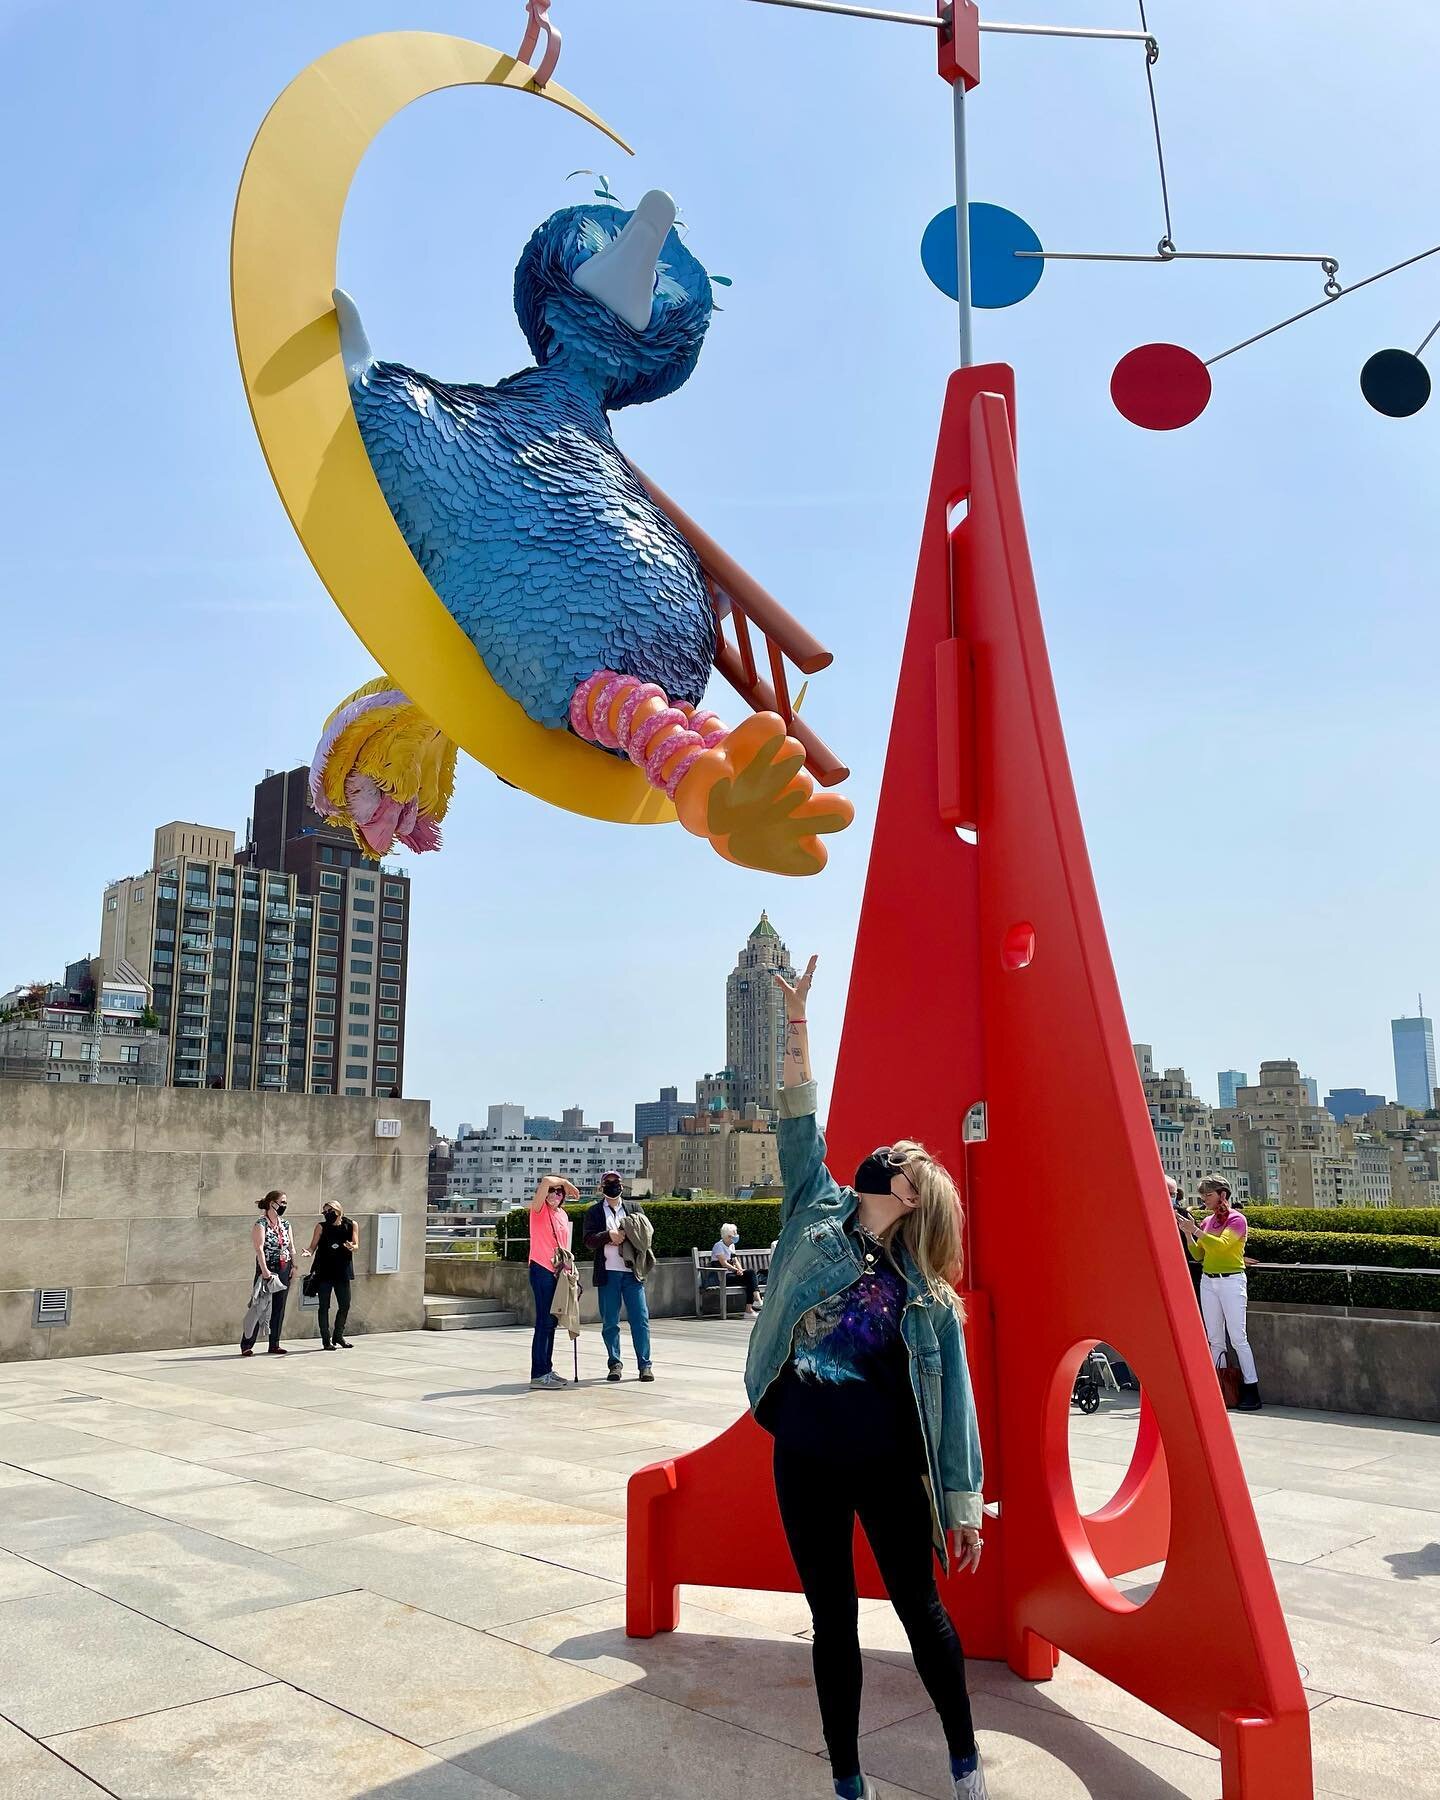 Joy &bull; Nostalgia &bull; Hope 🐥💙🪜🌙
my absolute favorite trio. could not love this most clever rooftop @metmuseum commission by #alexdacorte more. exactly the kind of art I need after this last year. 💛🔺🌟thanks for the perfect documentation a